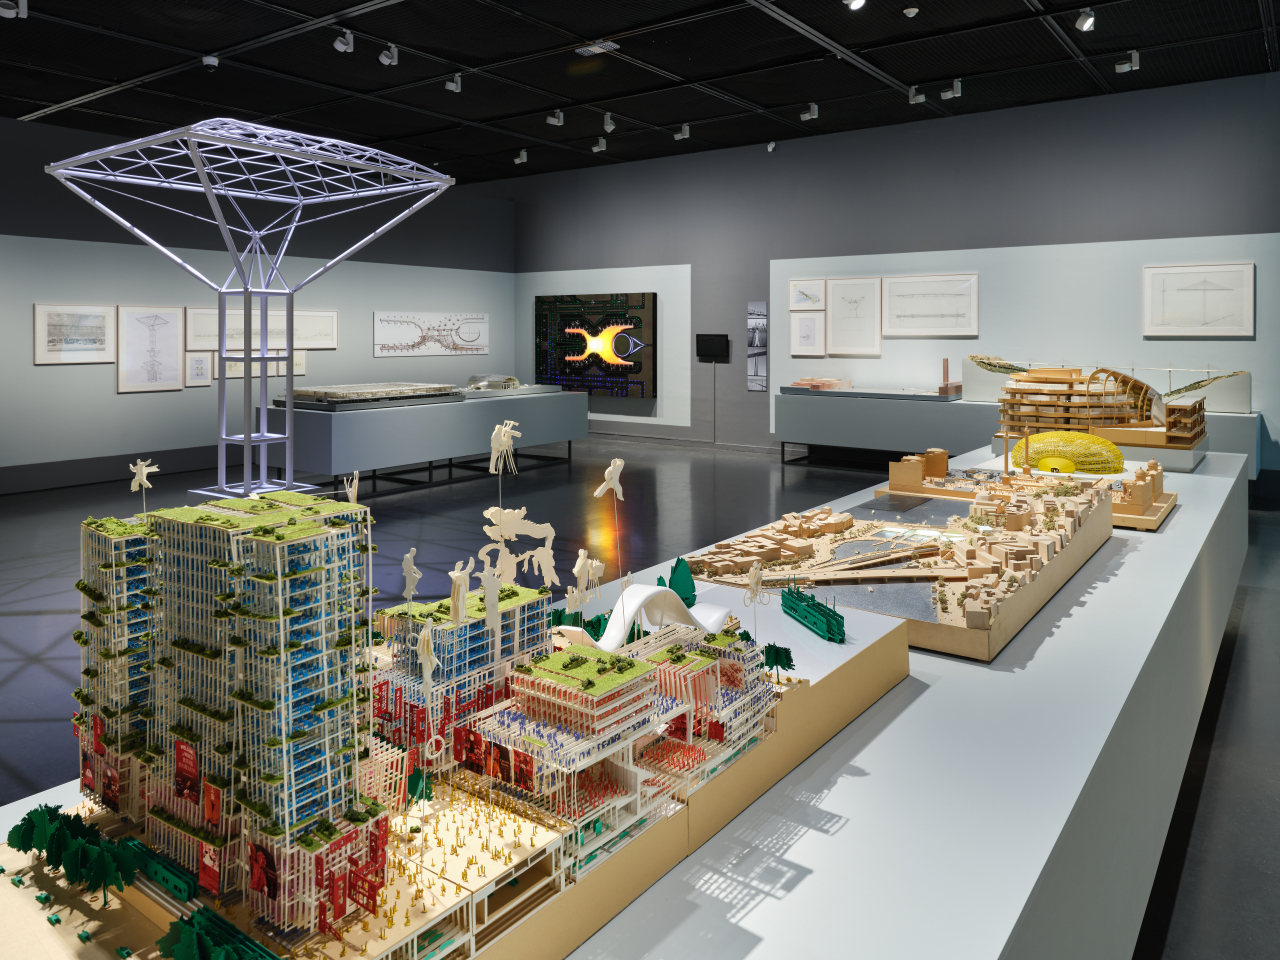 An installation view of “Future Positive: Norman Foster, Foster + Partners” at Seoul Museum of Art (Courtesy of the museum)